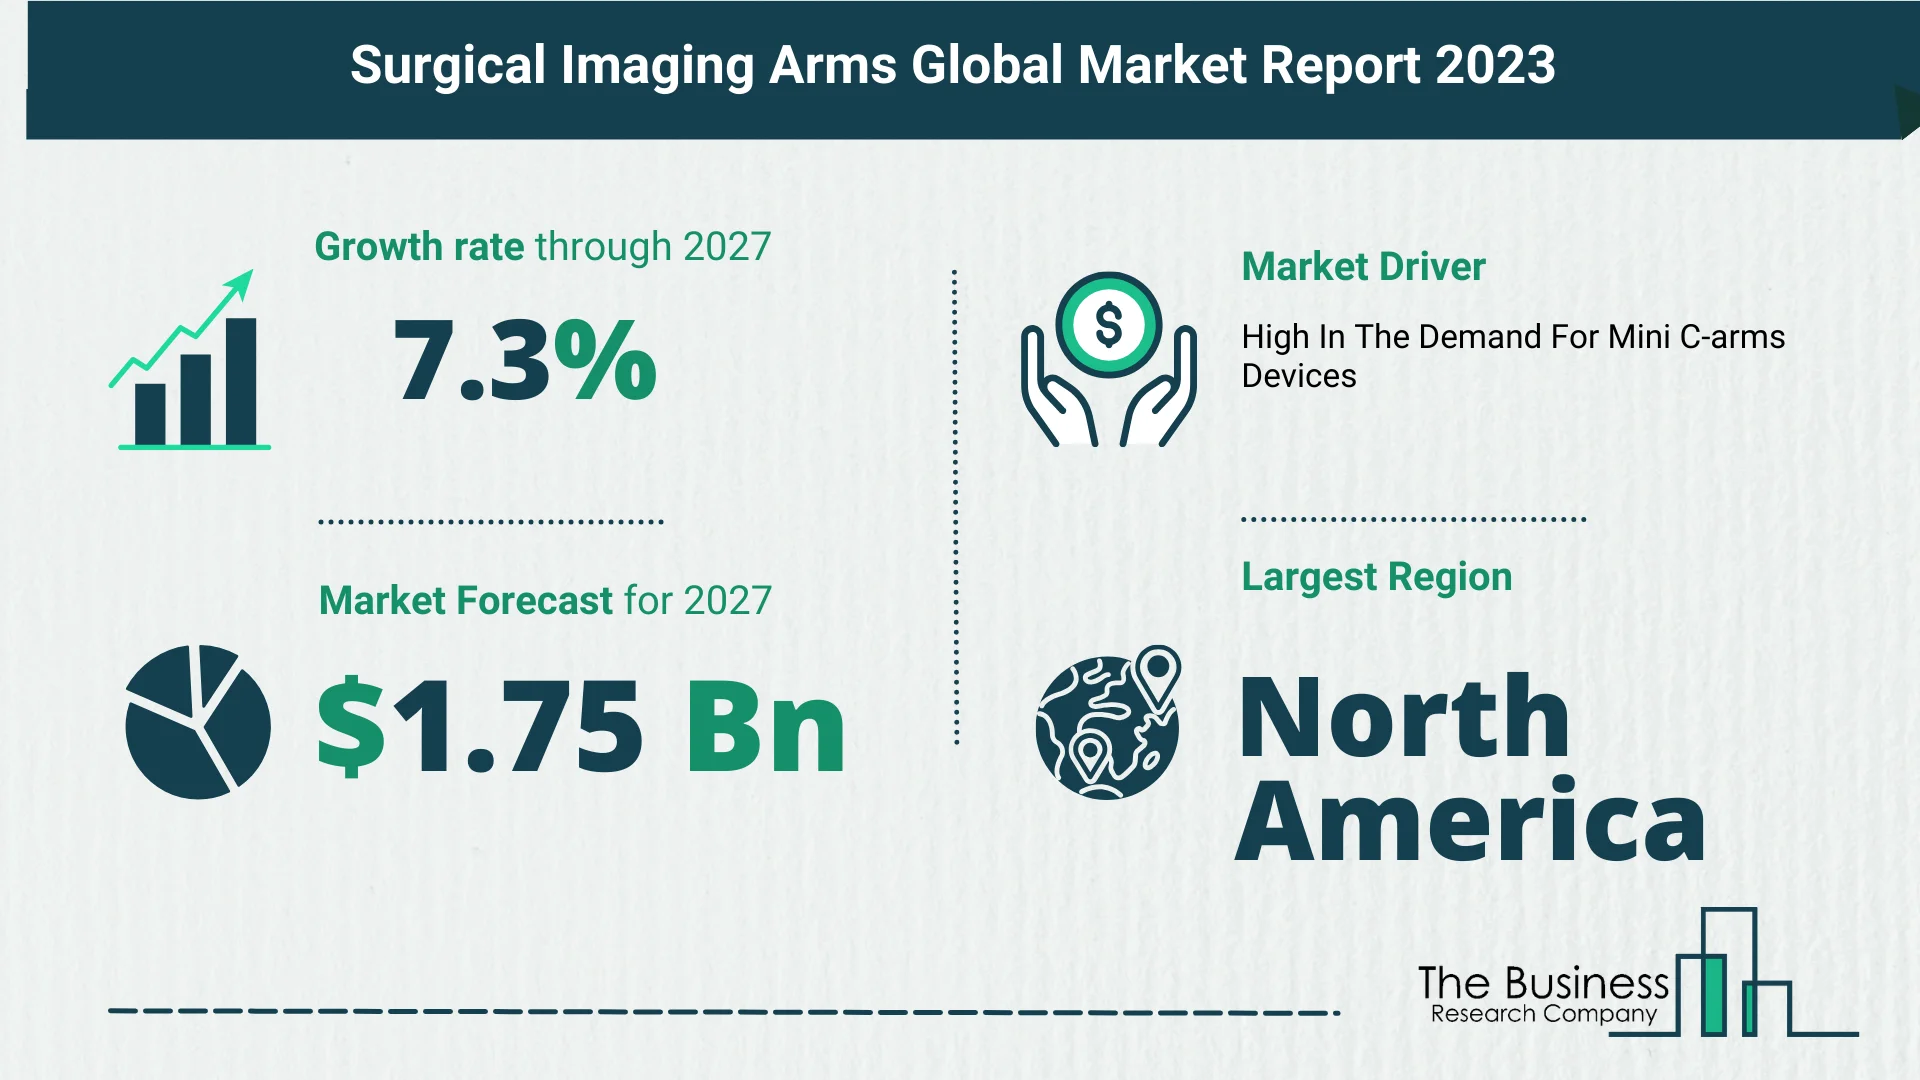 Key Takeaways From The Global Surgical Imaging Arms Market Forecast 2023